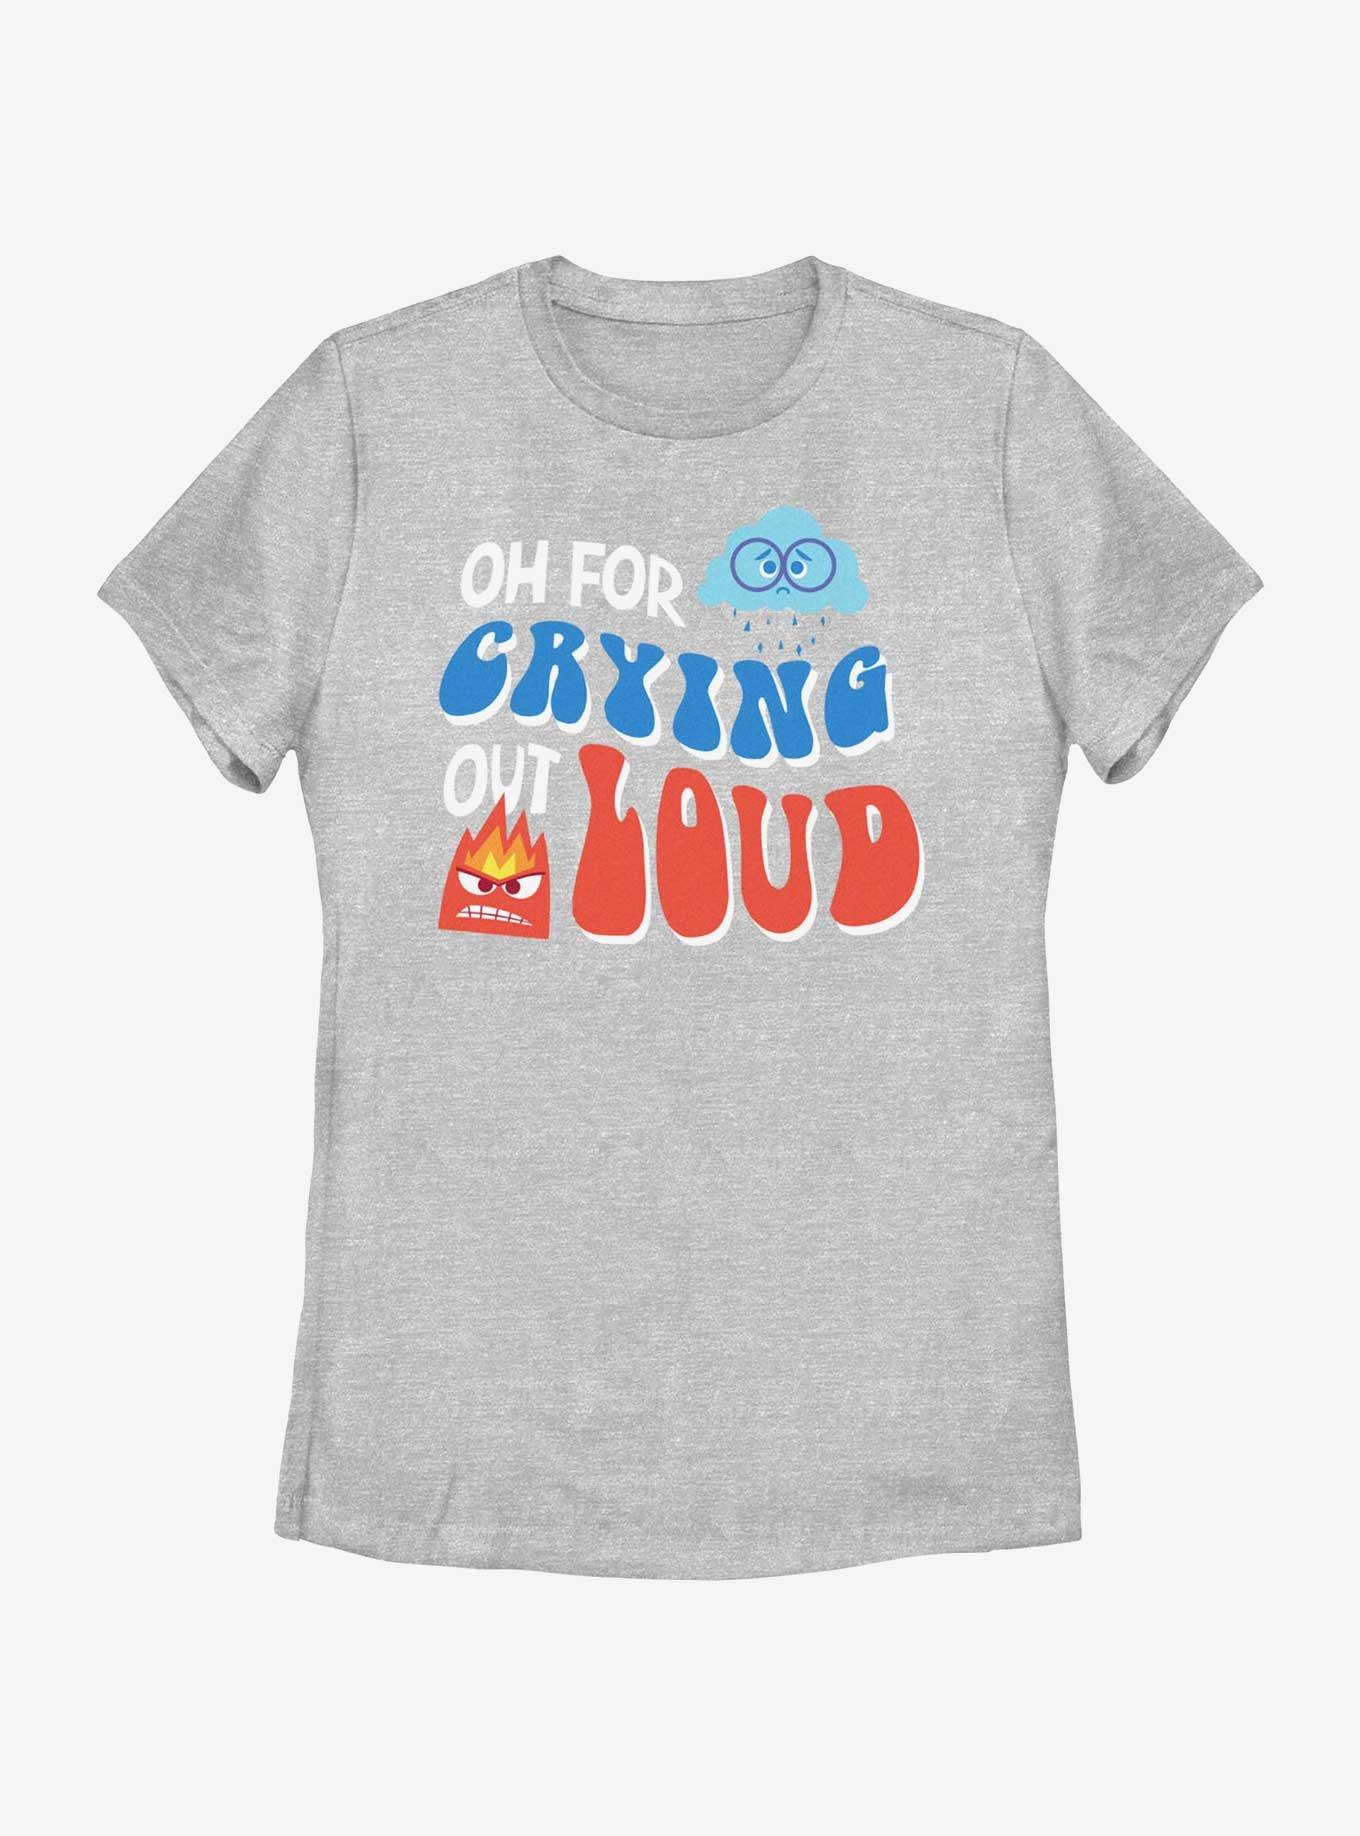 Disney Pixar Inside Out 2 Crying Out Loud Womens T-Shirt, ATH HTR, hi-res